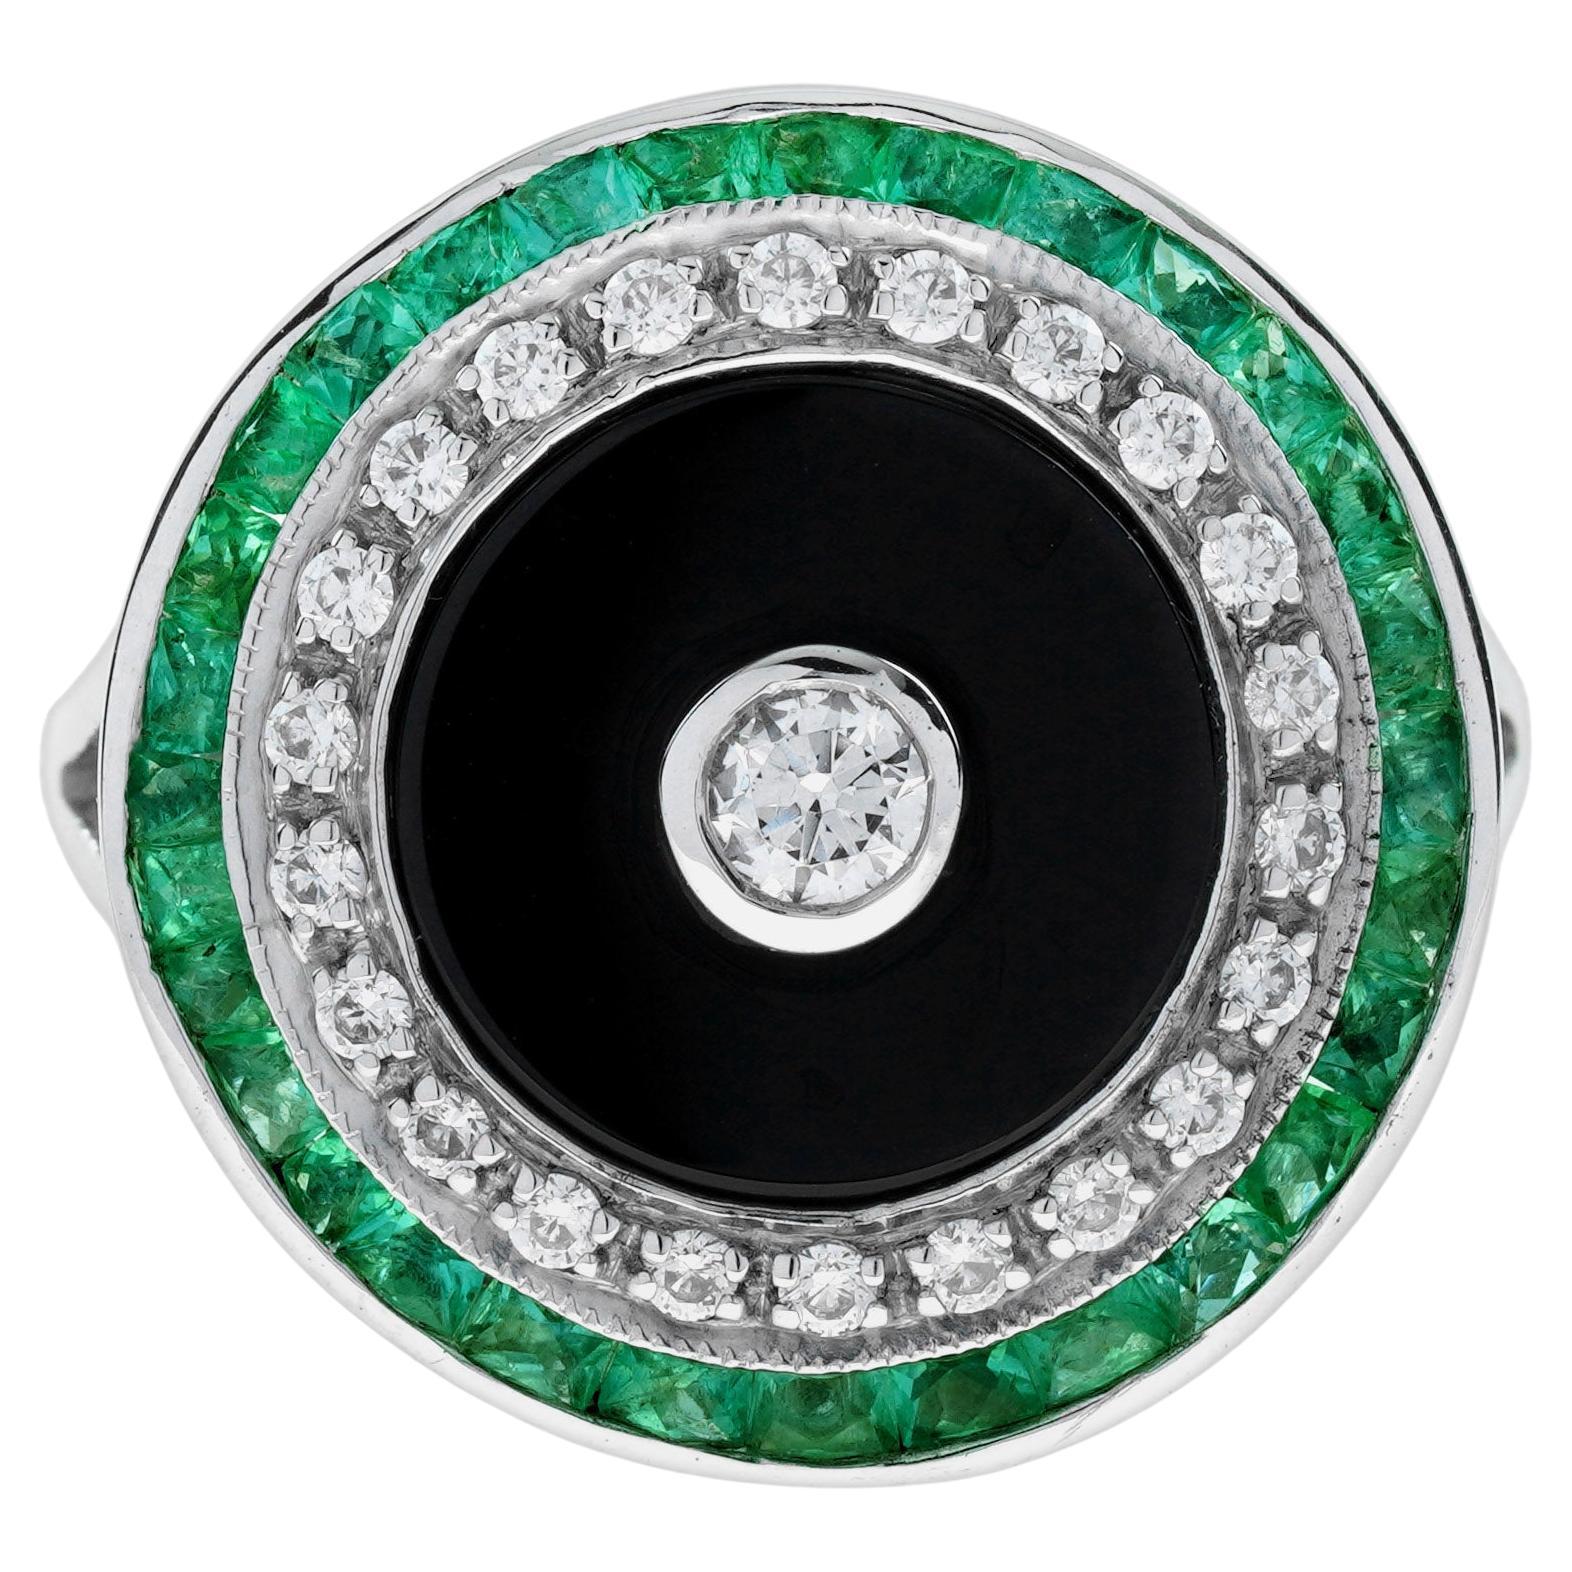 Diamond Onyx Emerald Art Deco Style Target Cocktail Ring in 14K White Gold